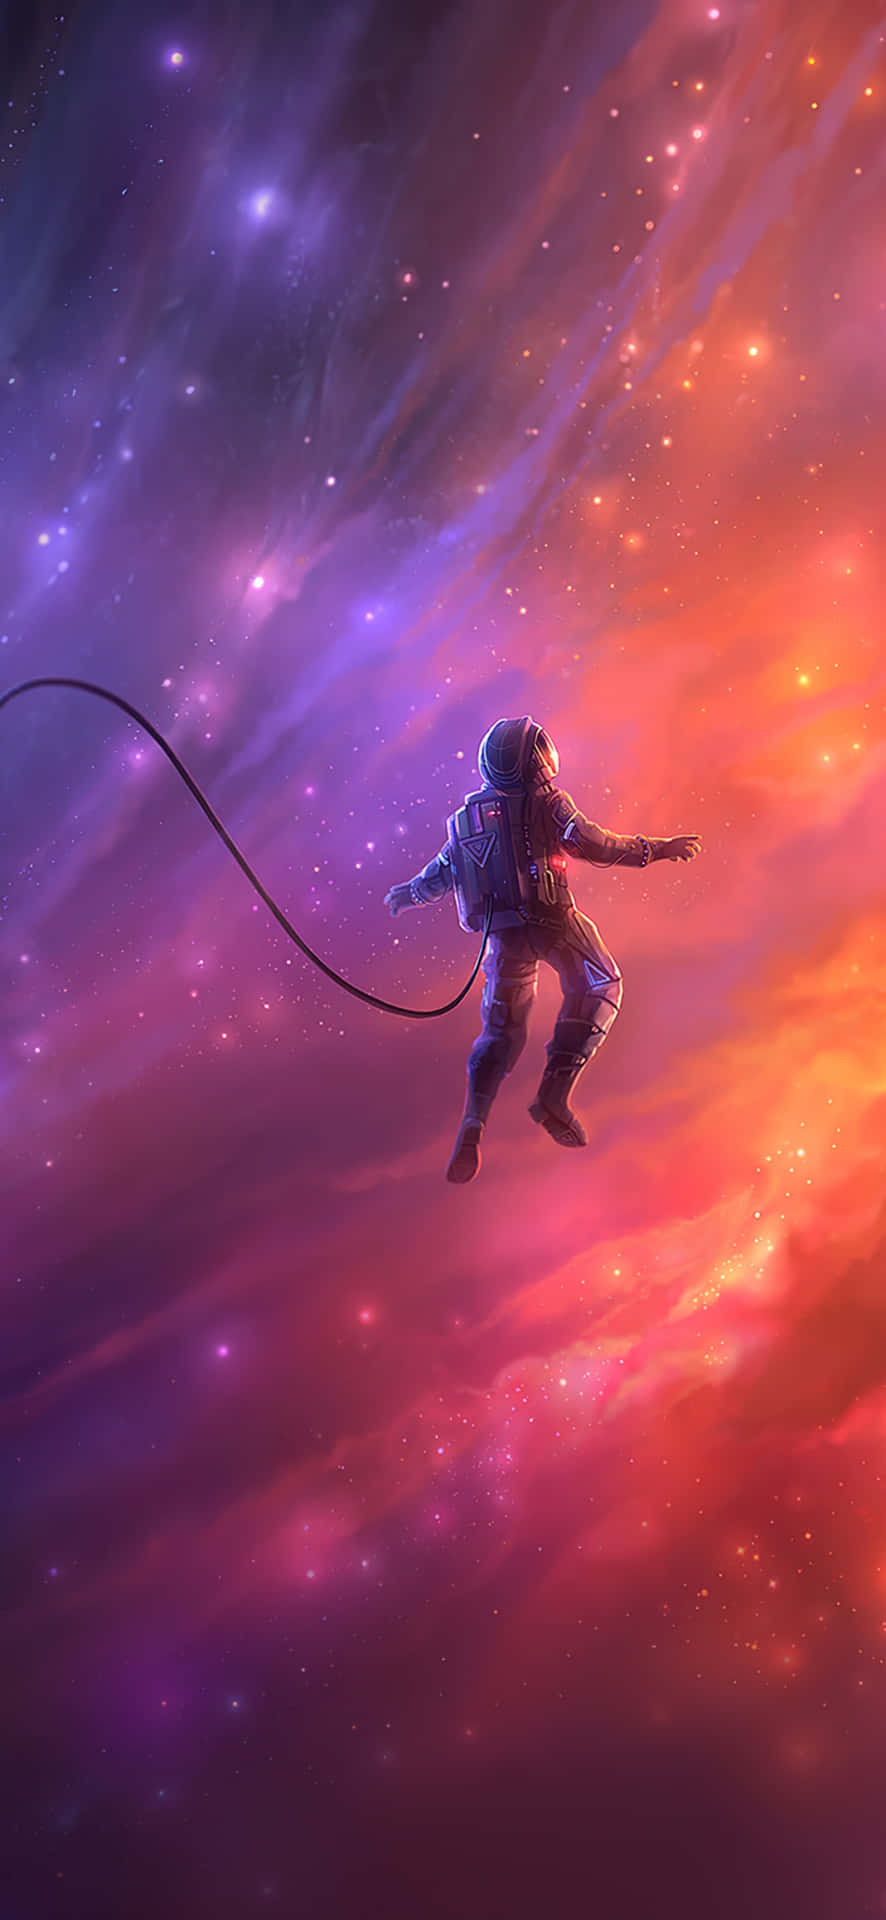 "take A Journey Through The Stars And Explore The Wonders Of Space With The Iphone Xr" Wallpaper